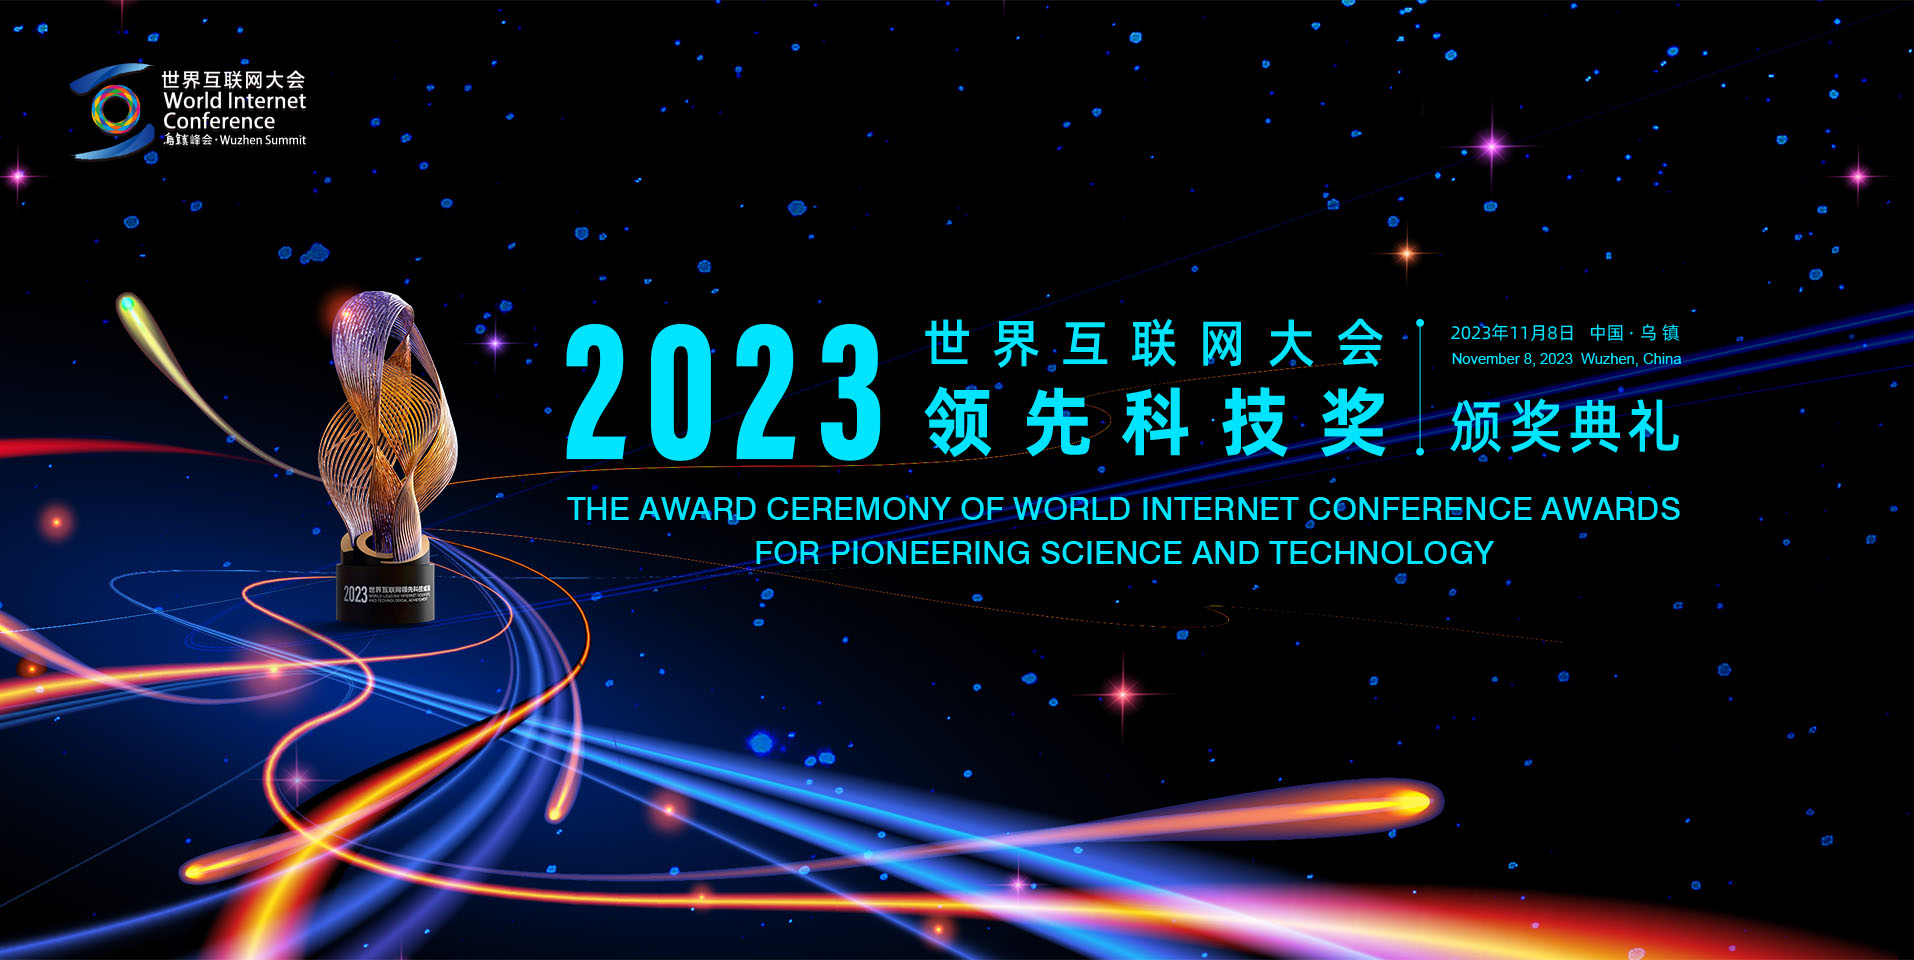 World Internet Conference Awards for Pioneering Science and Technology